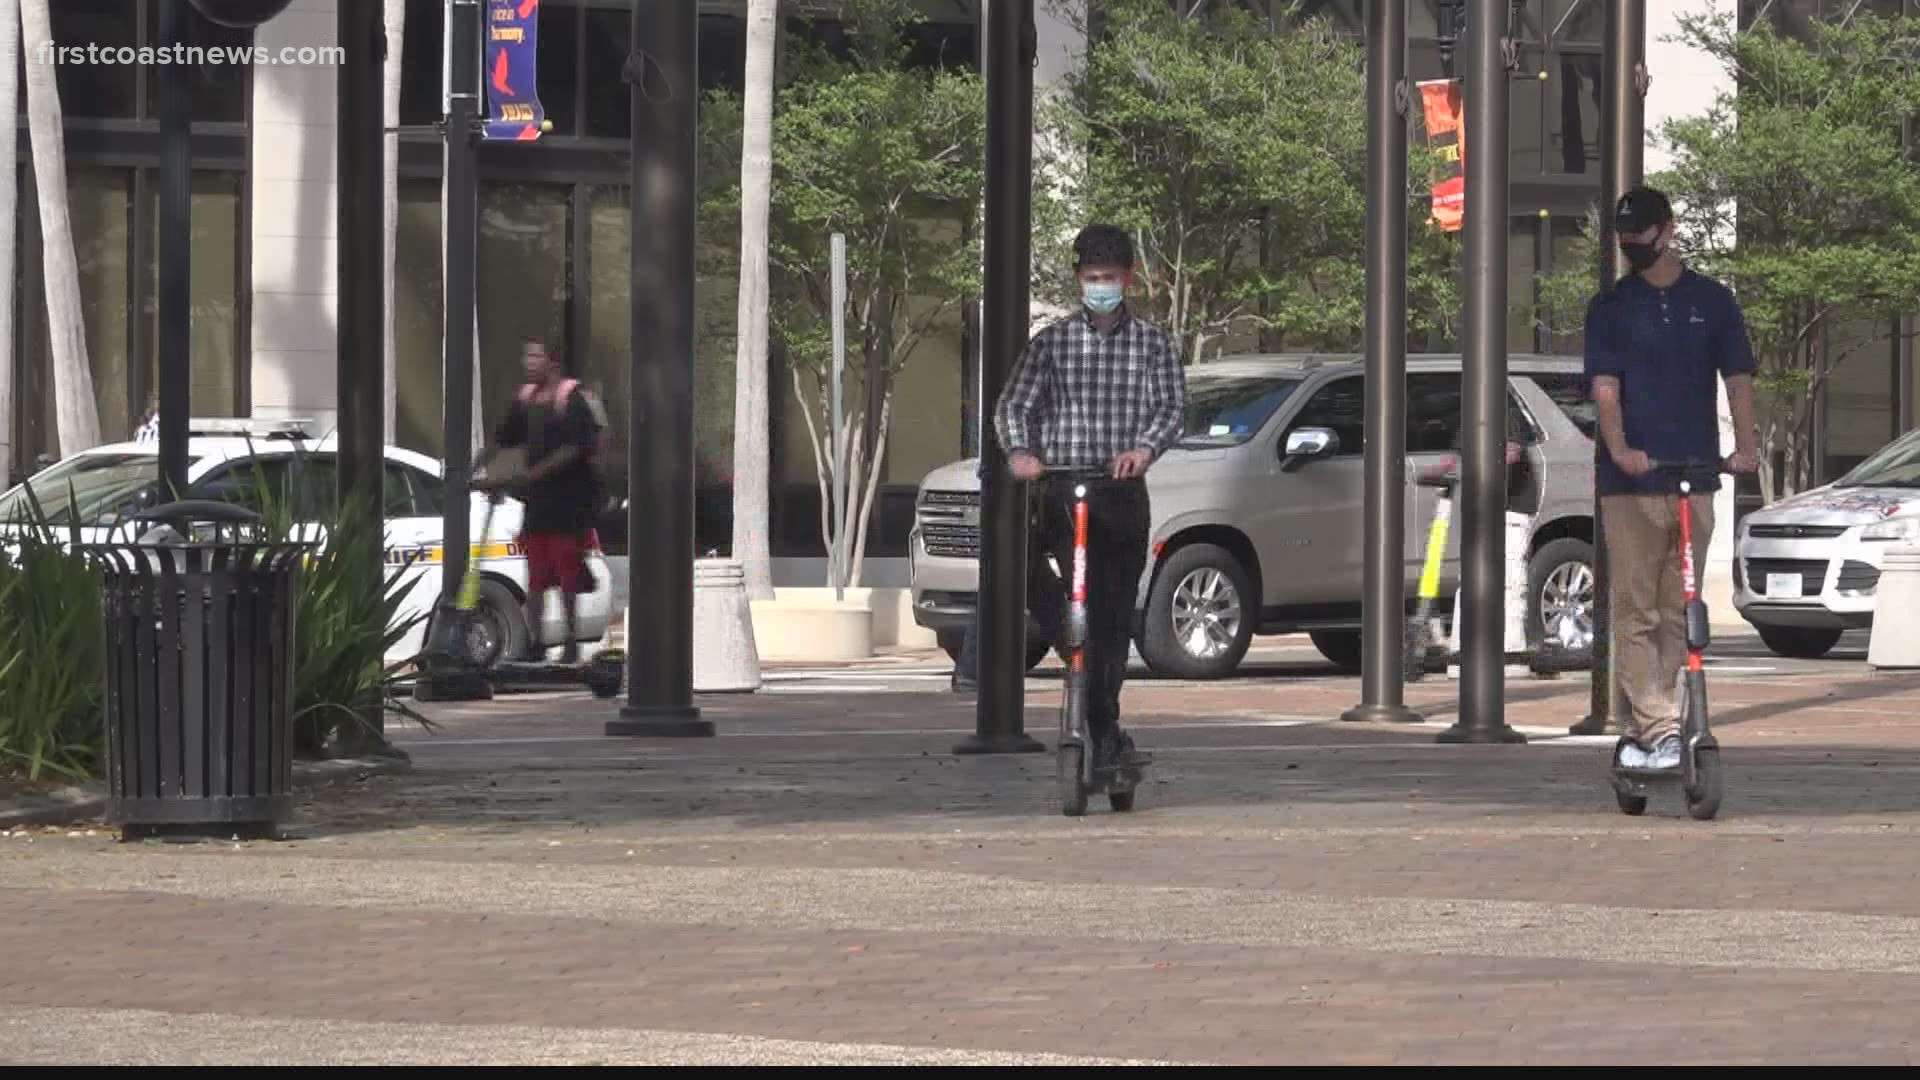 Council members are moving a step closer to expanding the number of companies offering the rides from four to six.